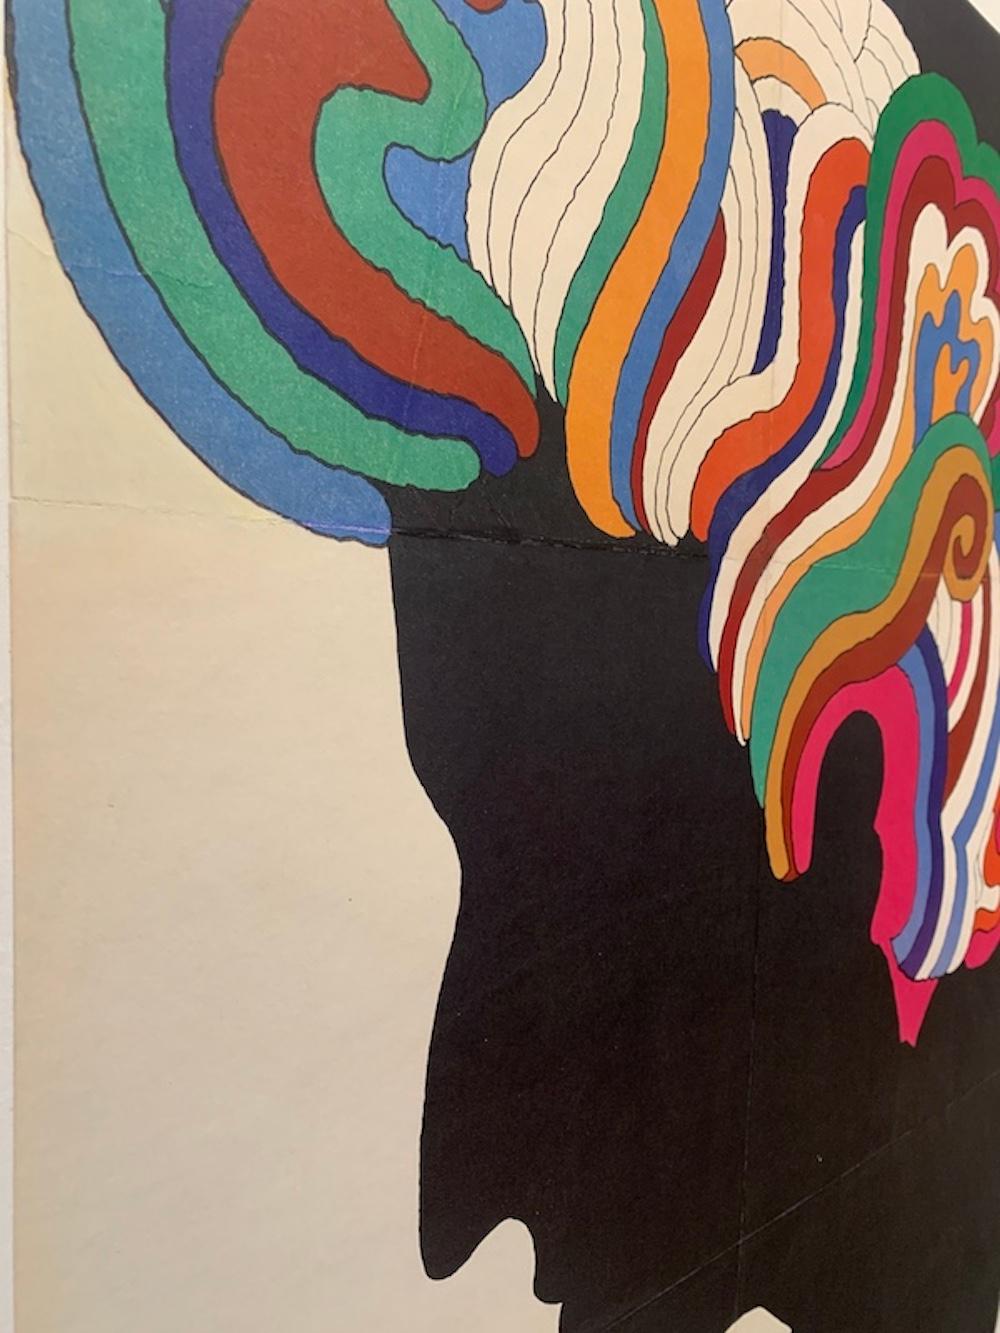 BOB DYLAN Retro Original Vintage Music Poster by Milton Glaser, 1966

Glaser applied his signature psychedelic style to a poster he designed for Columbia Records in 1967 to illustrate Bob Dylan’s Greatest Hits album. The work led to a surge of fame